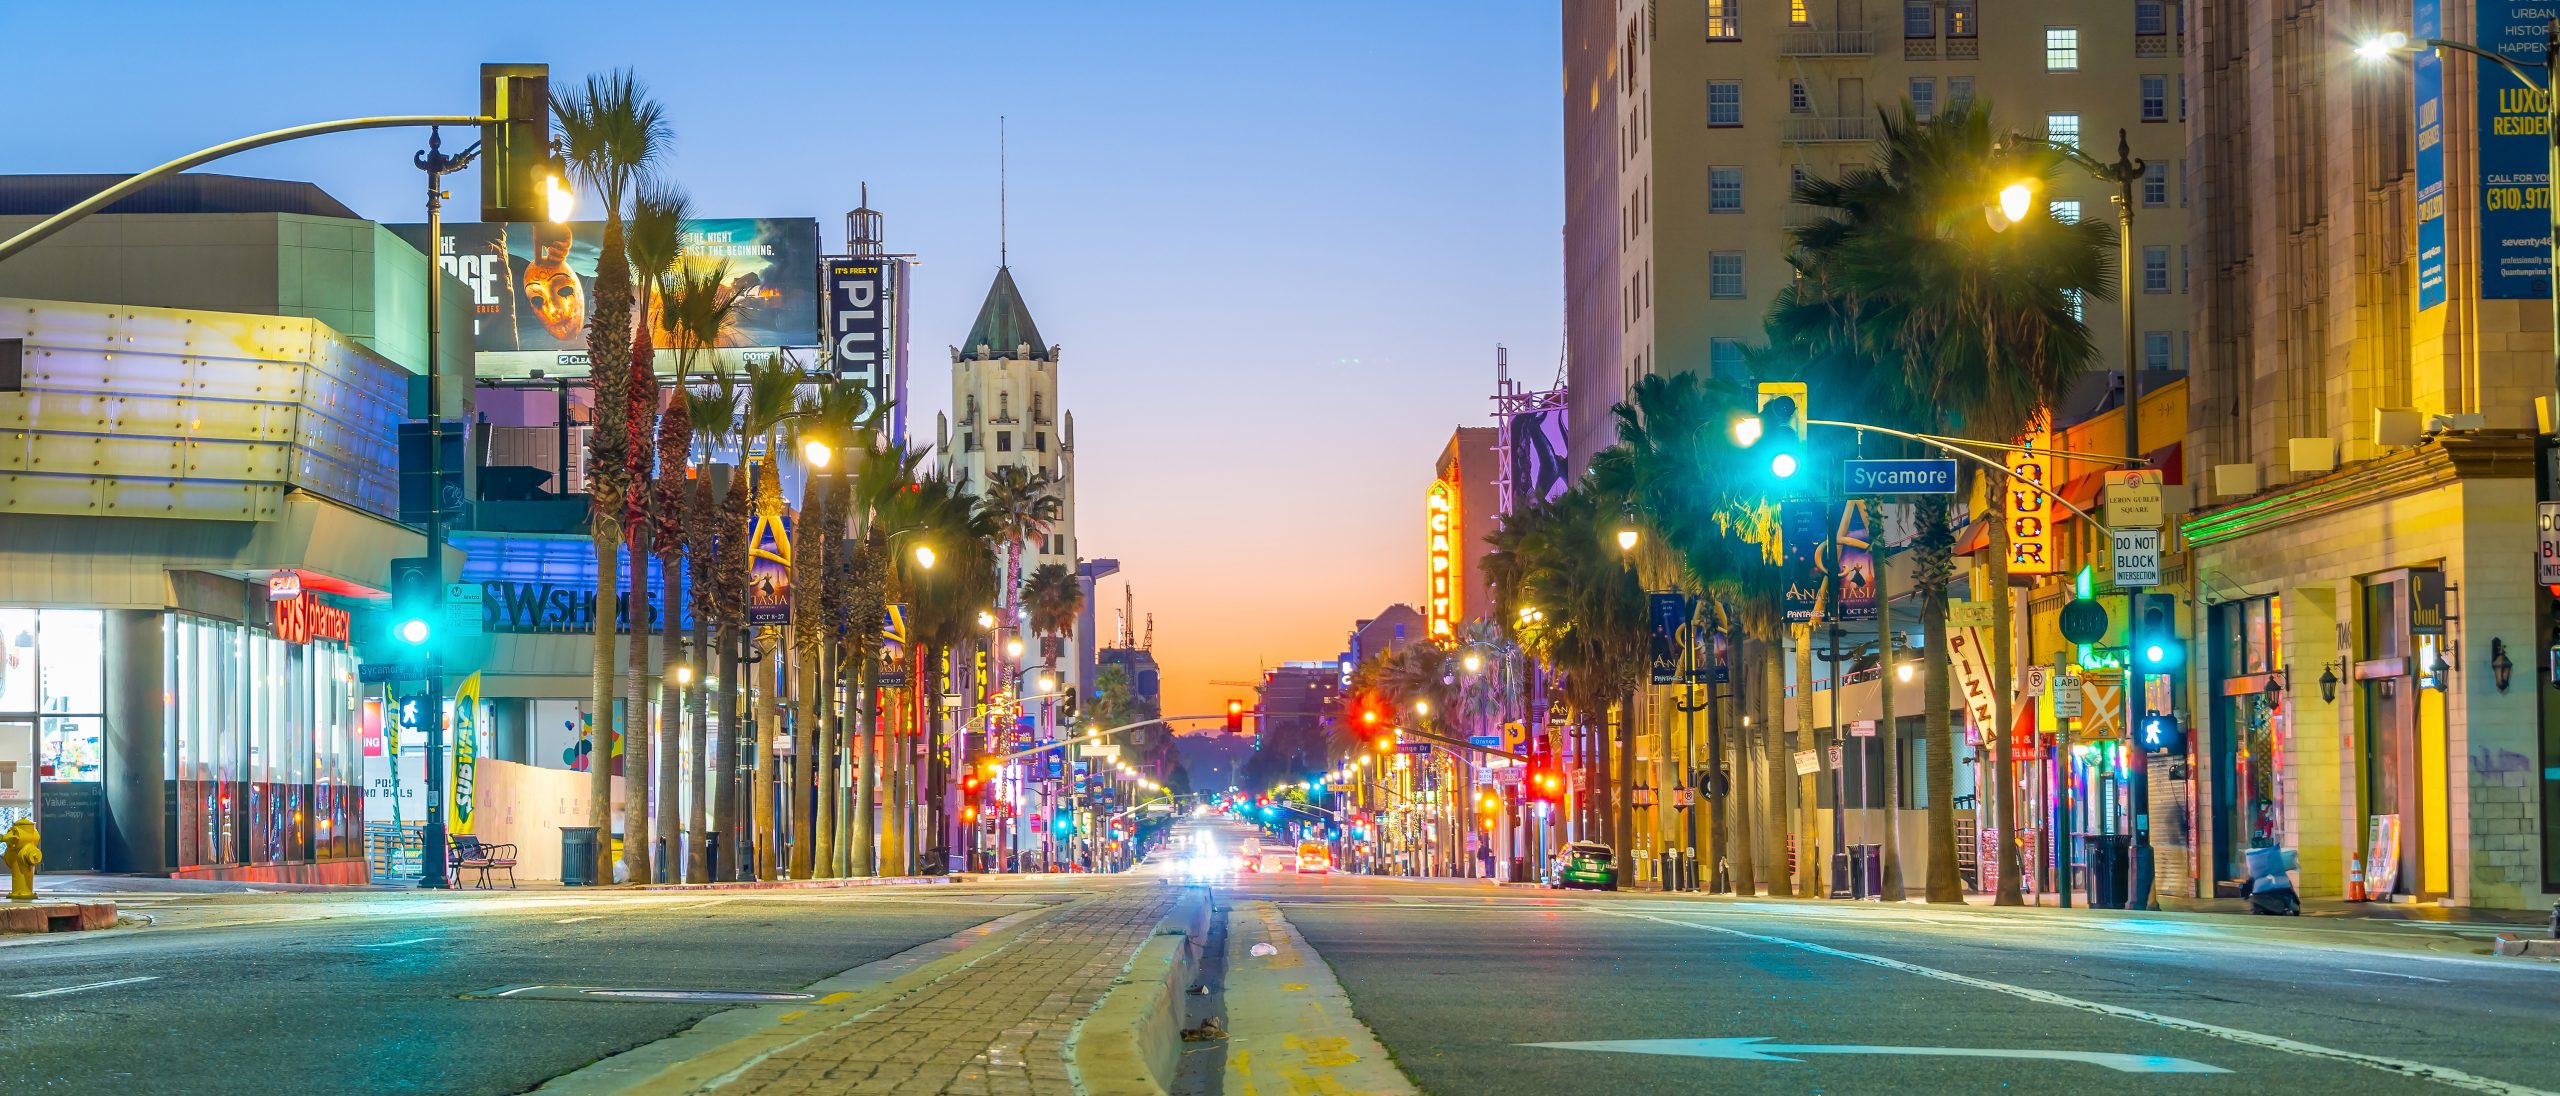 View of world famous Hollywood Boulevard district in Los Angeles, California, USA at twilight.